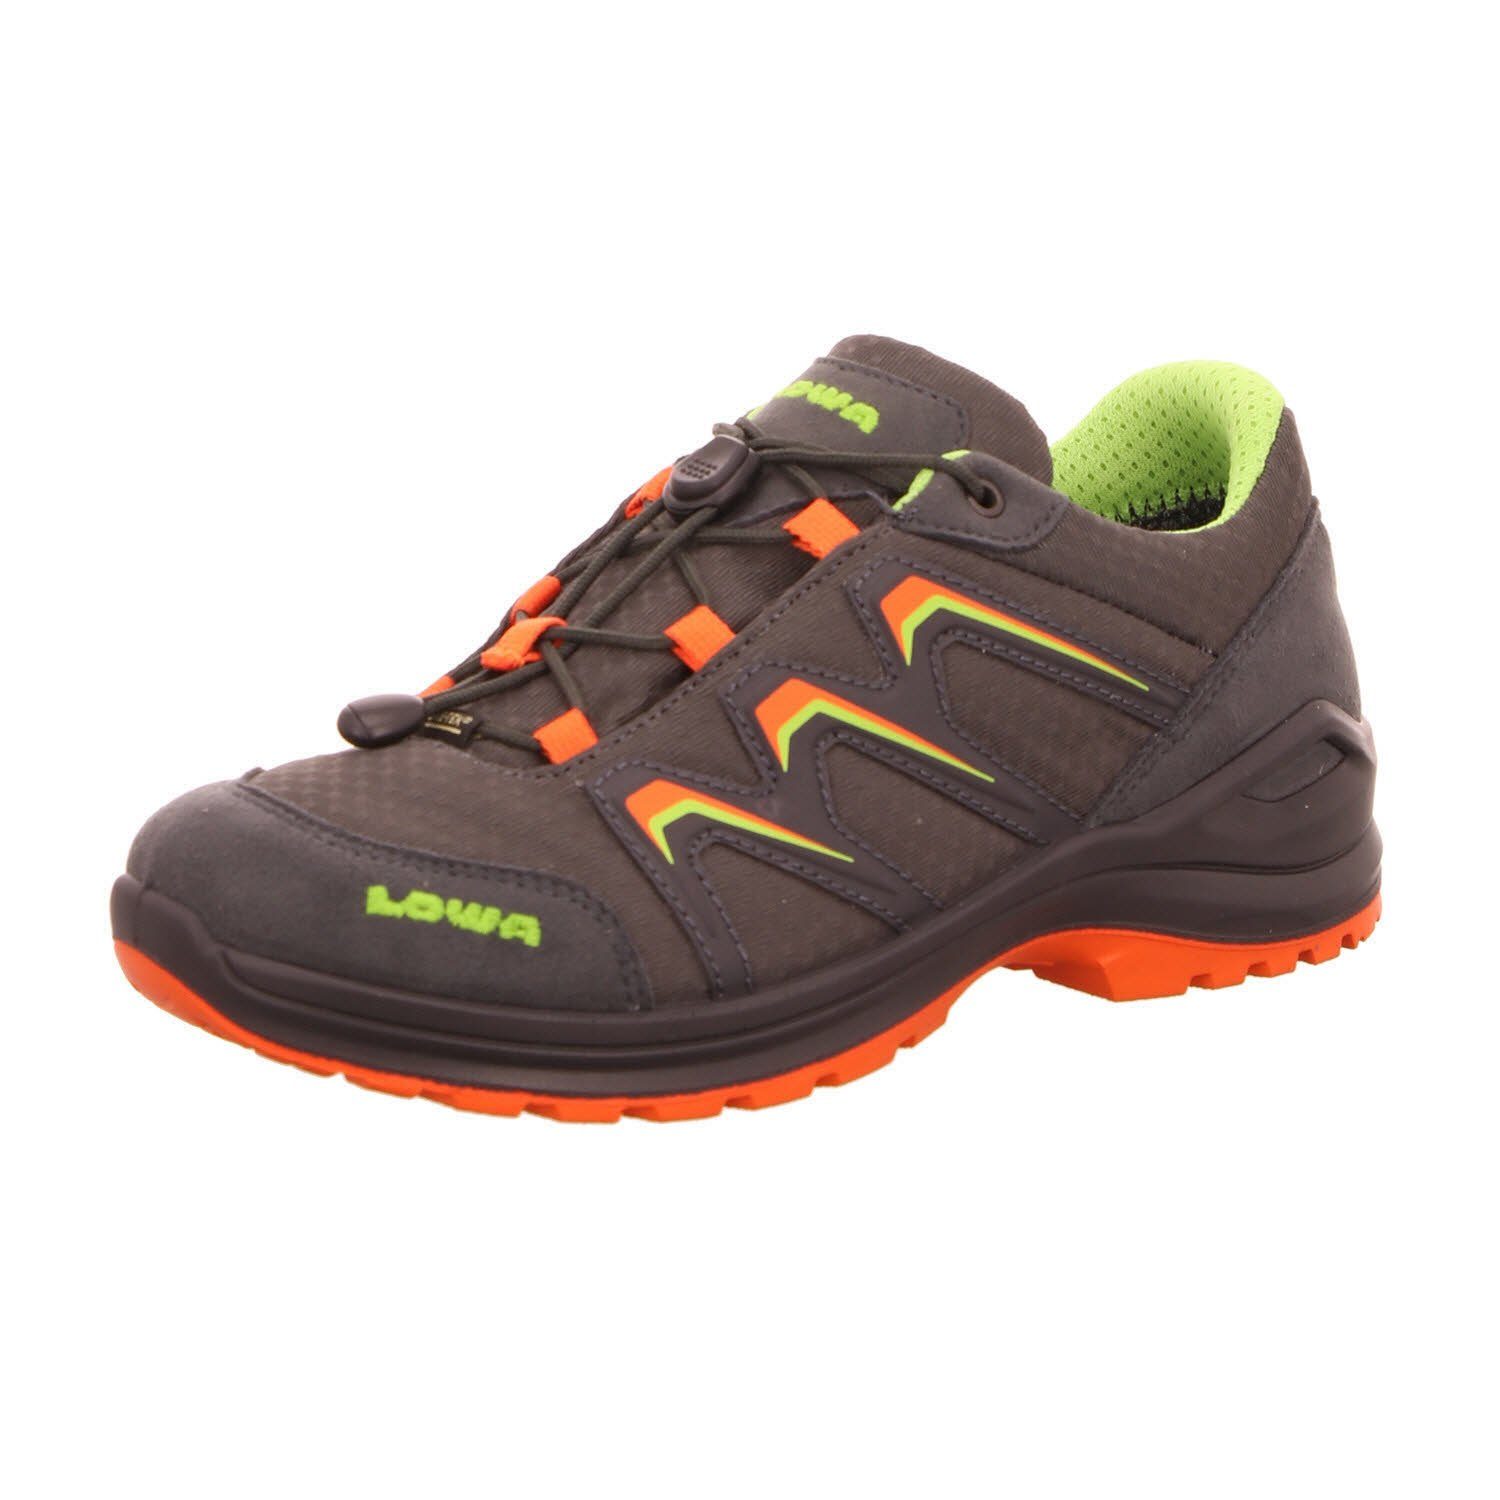 Outdoorschuh Lowa GRAPHIT/FLAME